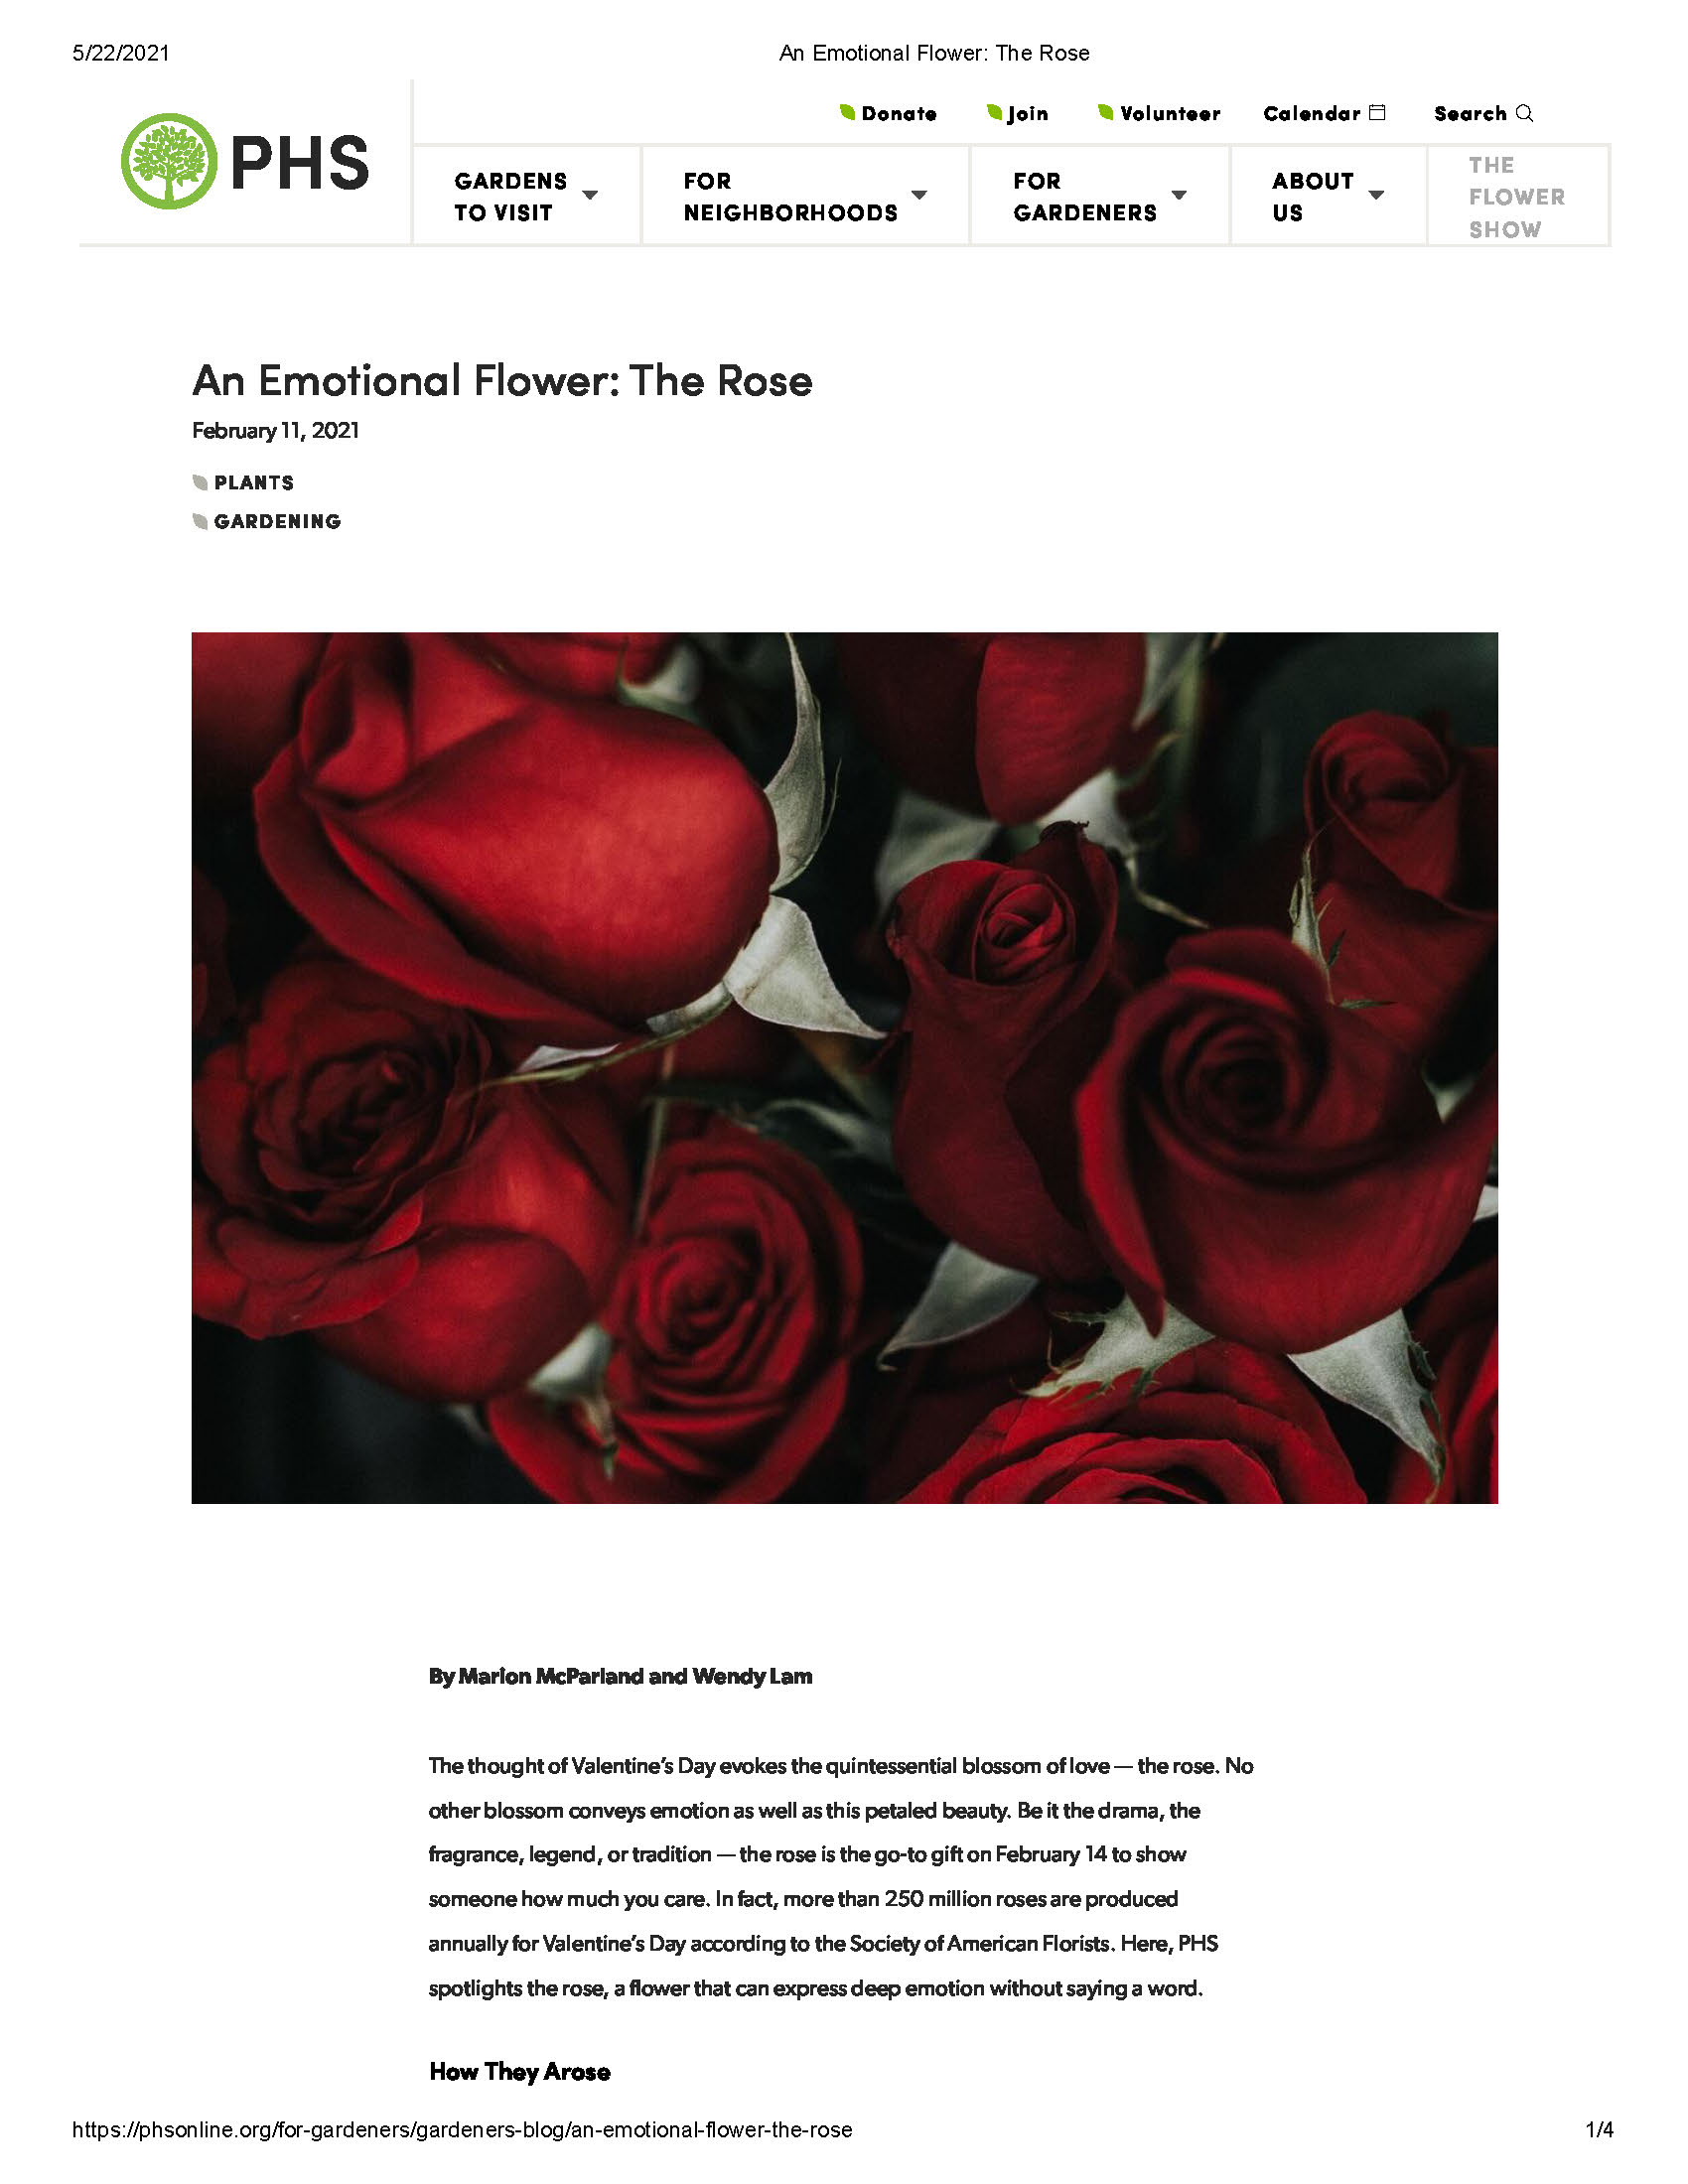 An Emotional Flower: The Rose